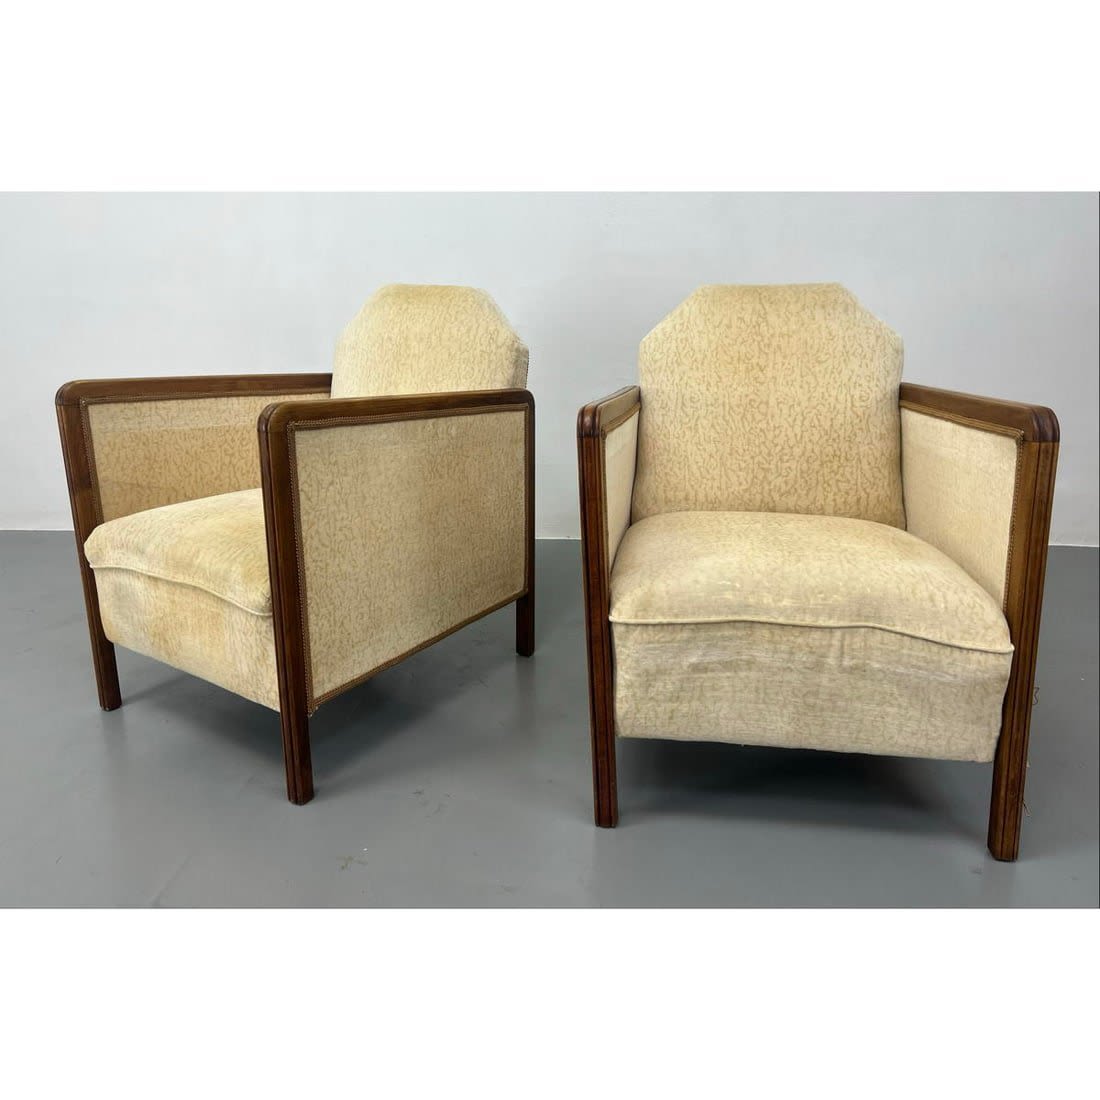 Pair French Art Deco Style Lounge